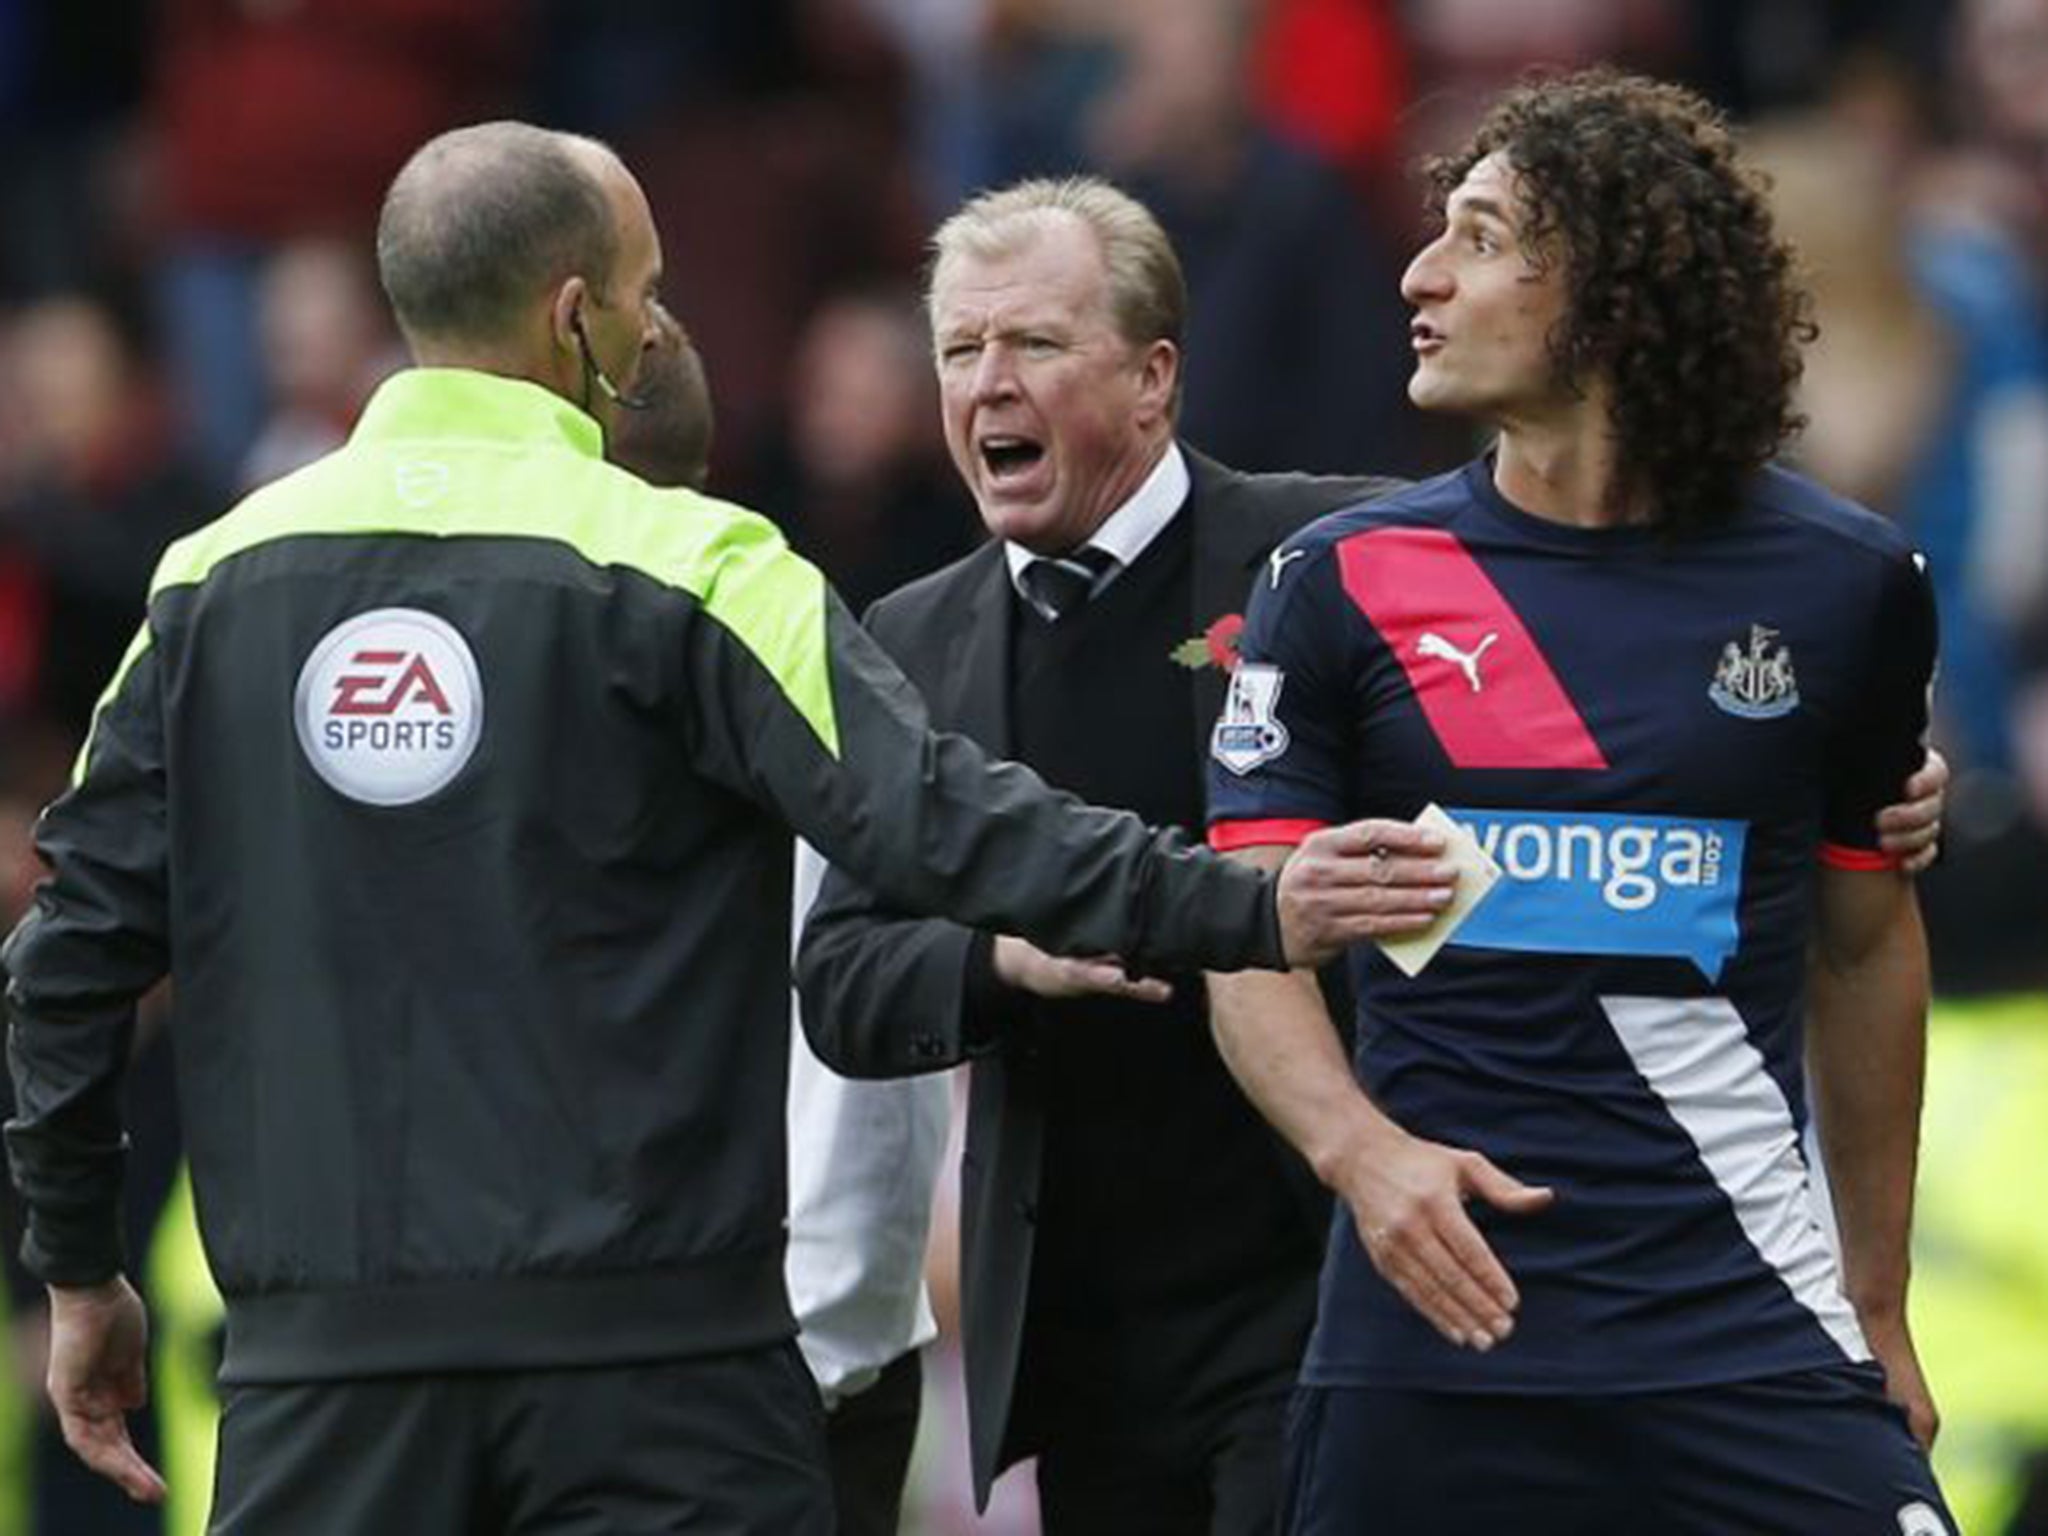 Newcastle captain Fabricio Coloccini is shown the red card before half-time for barging Steven Fletcher